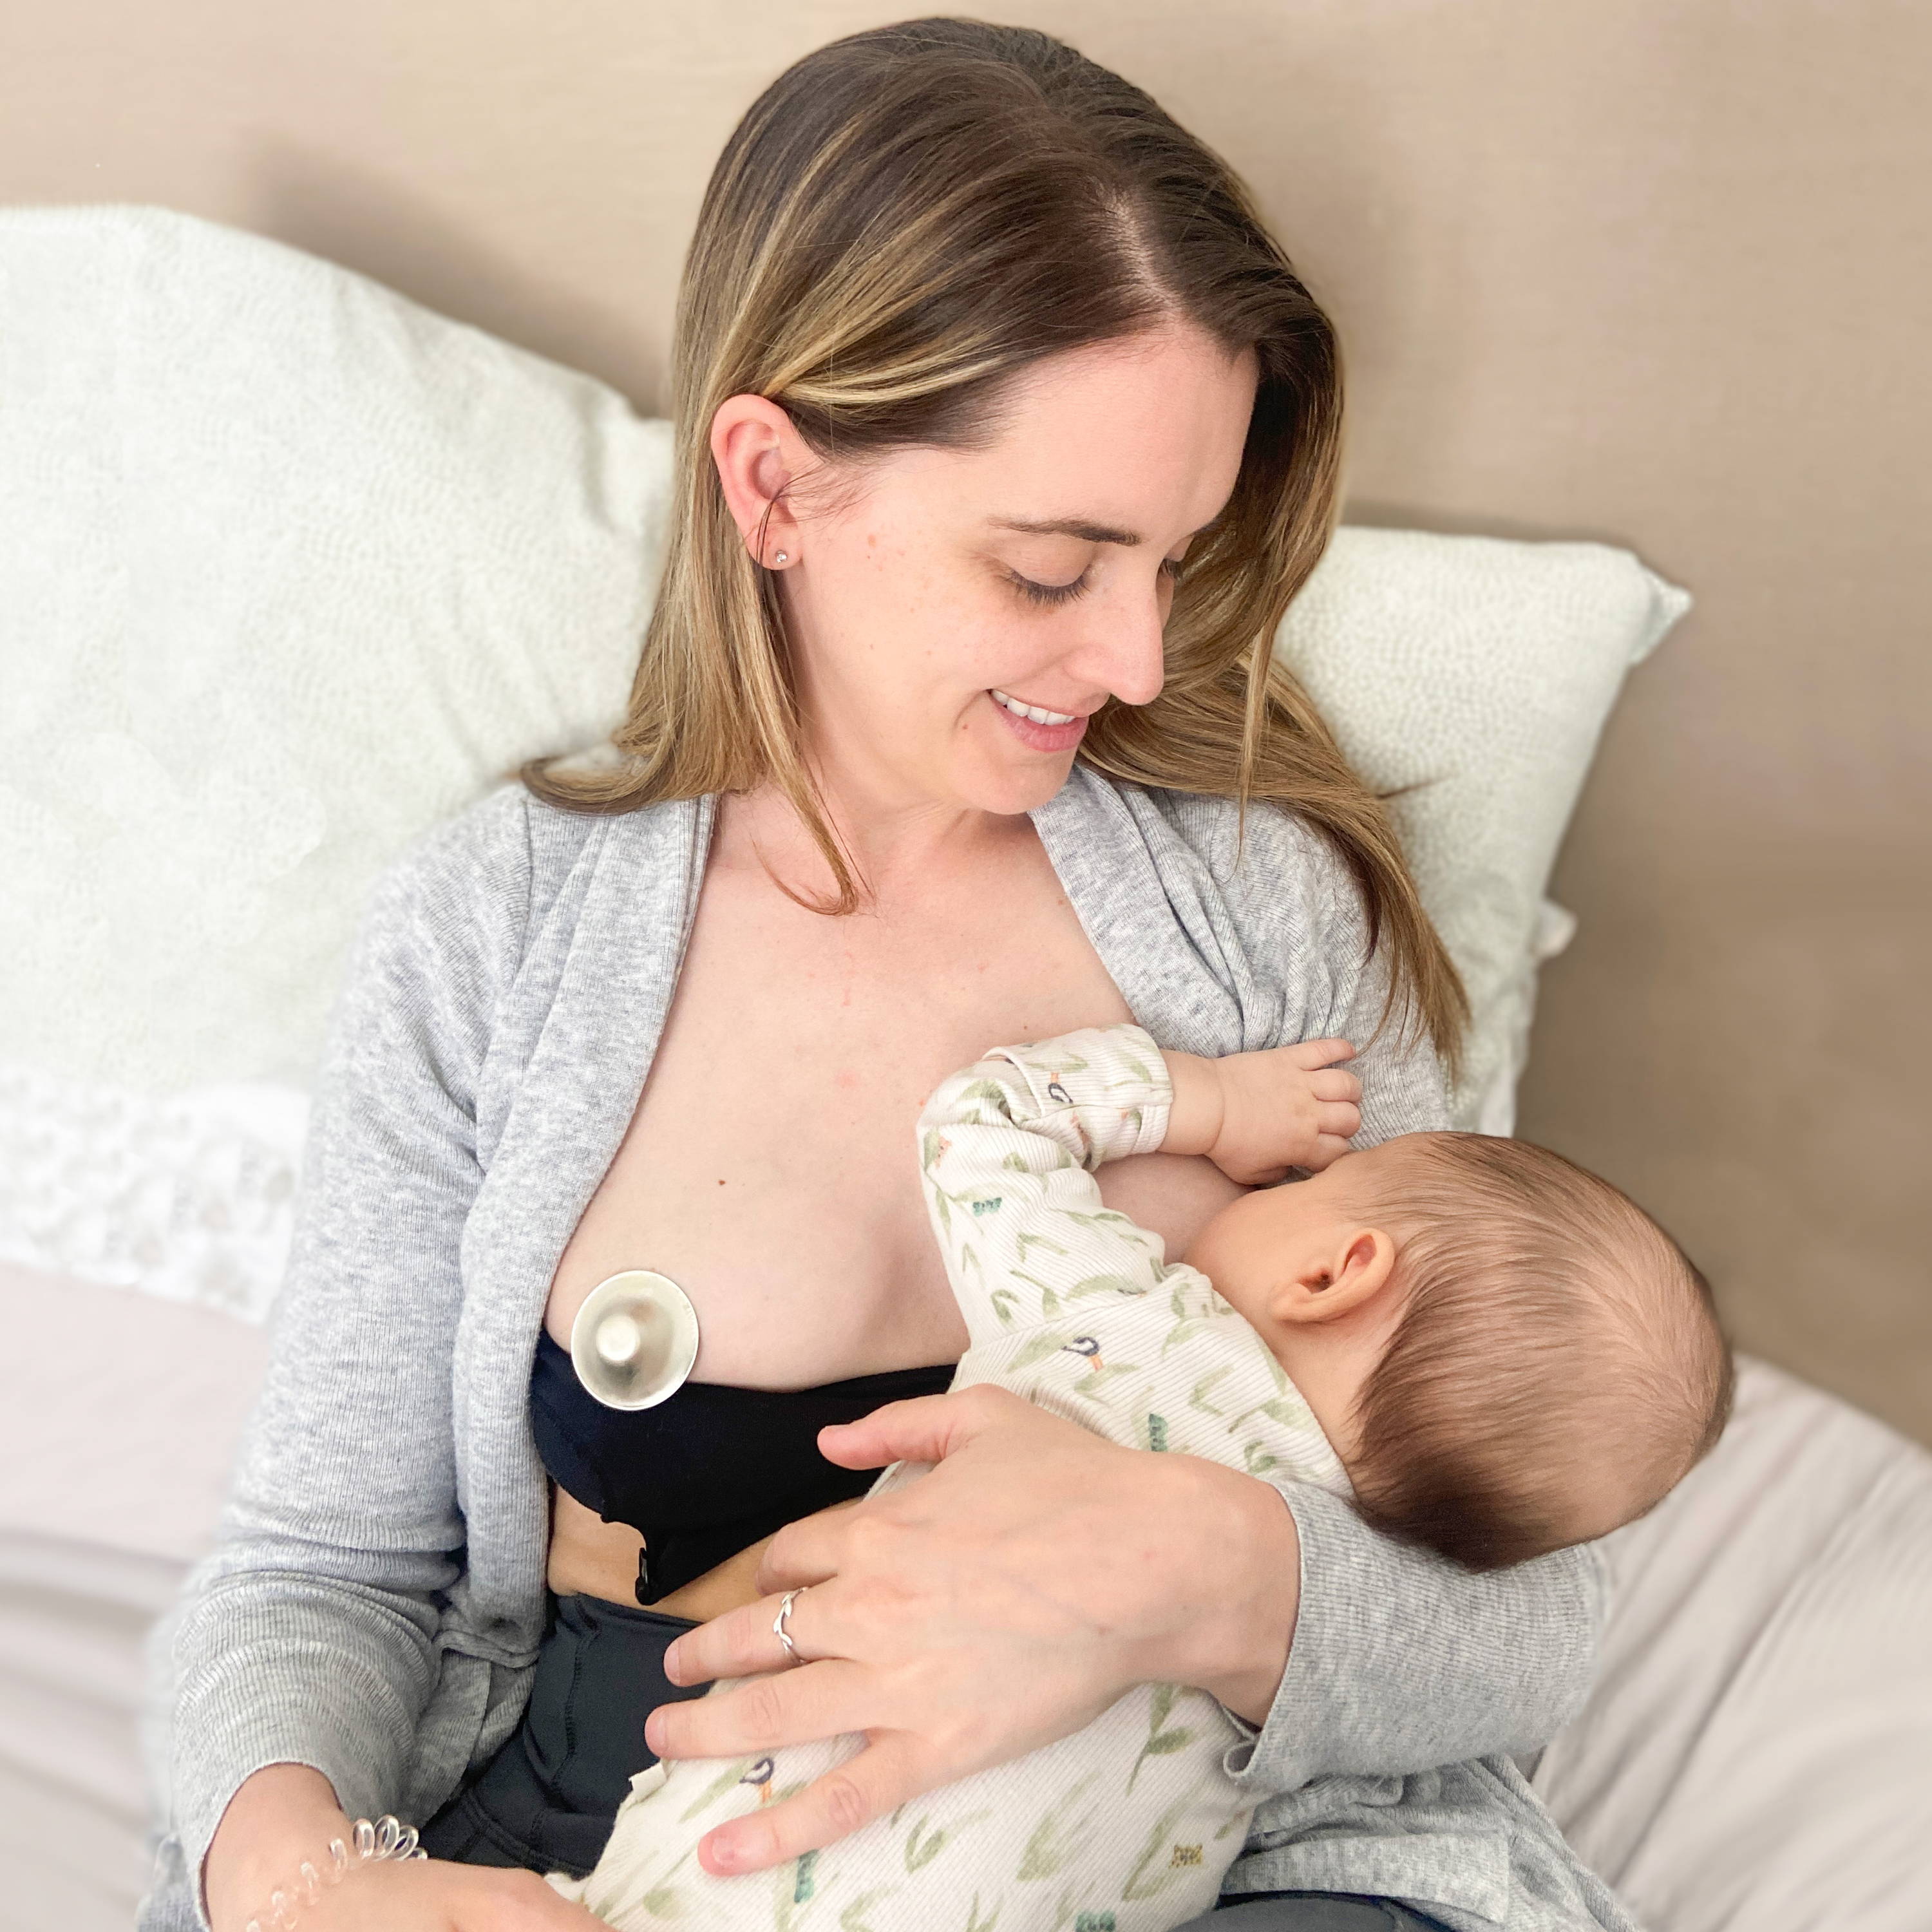 How to choose and use a nipple shield - AllThingsBreastFeeding